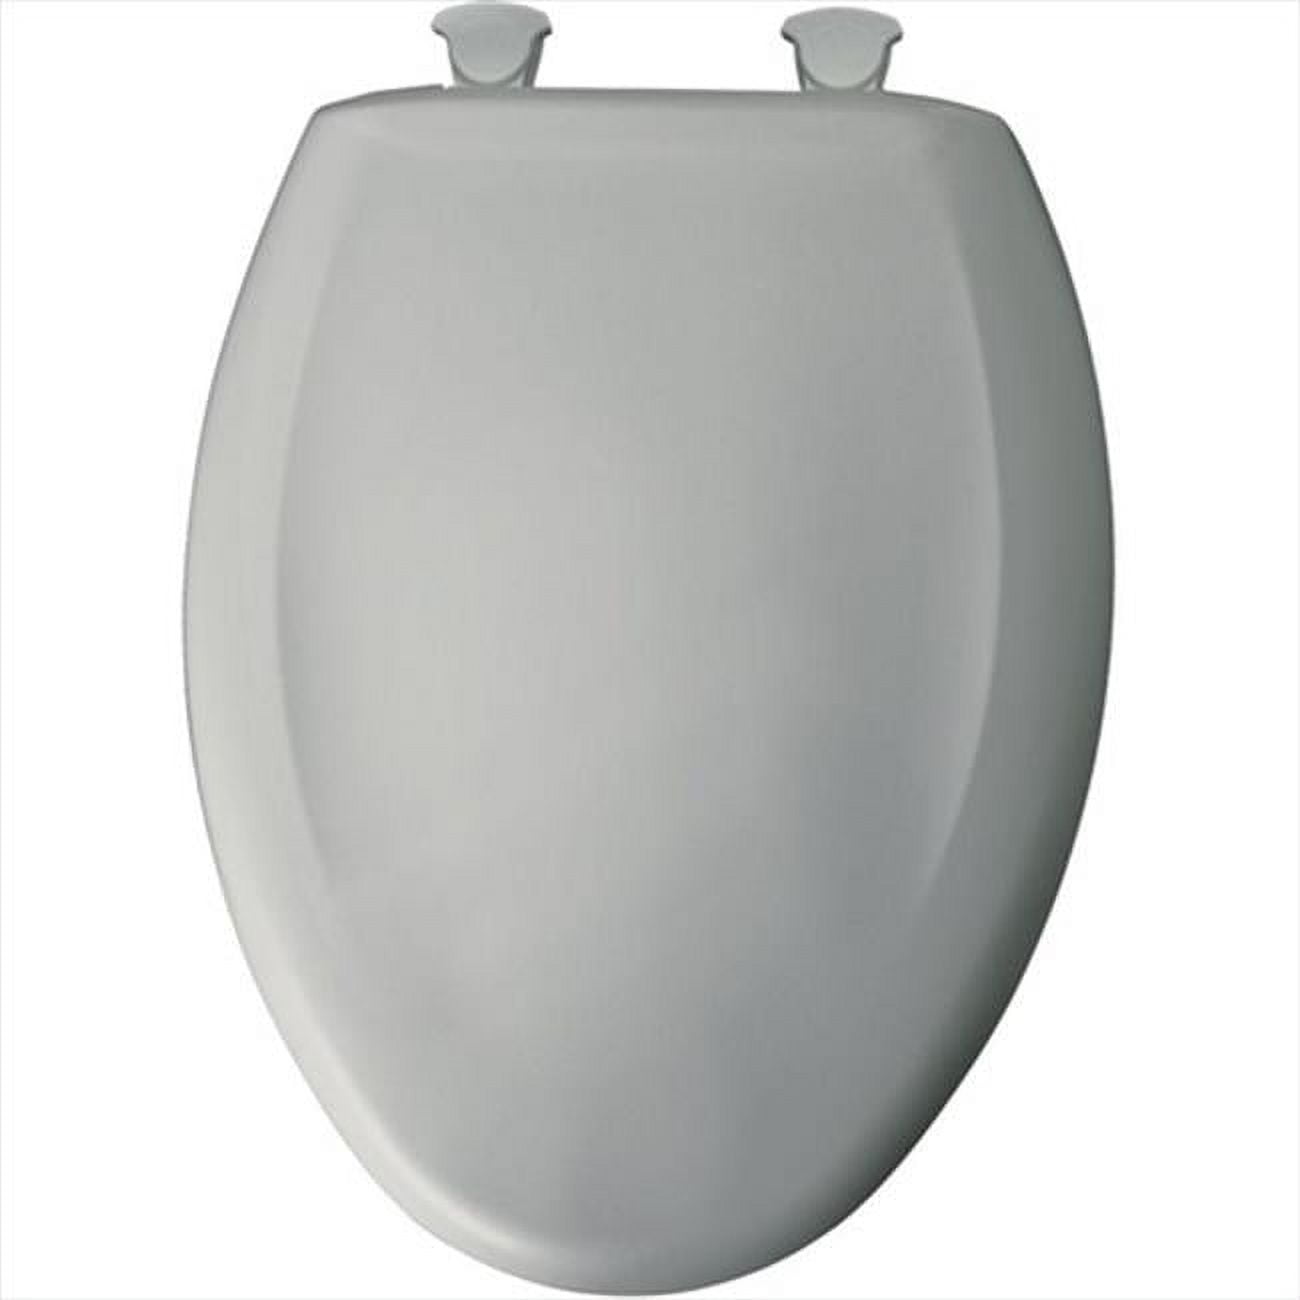 BEMIS 1200SLOWT 062 Elg Closed Front Toilet Seat,Ice Gray, With Cover,  Plastic, Elongated